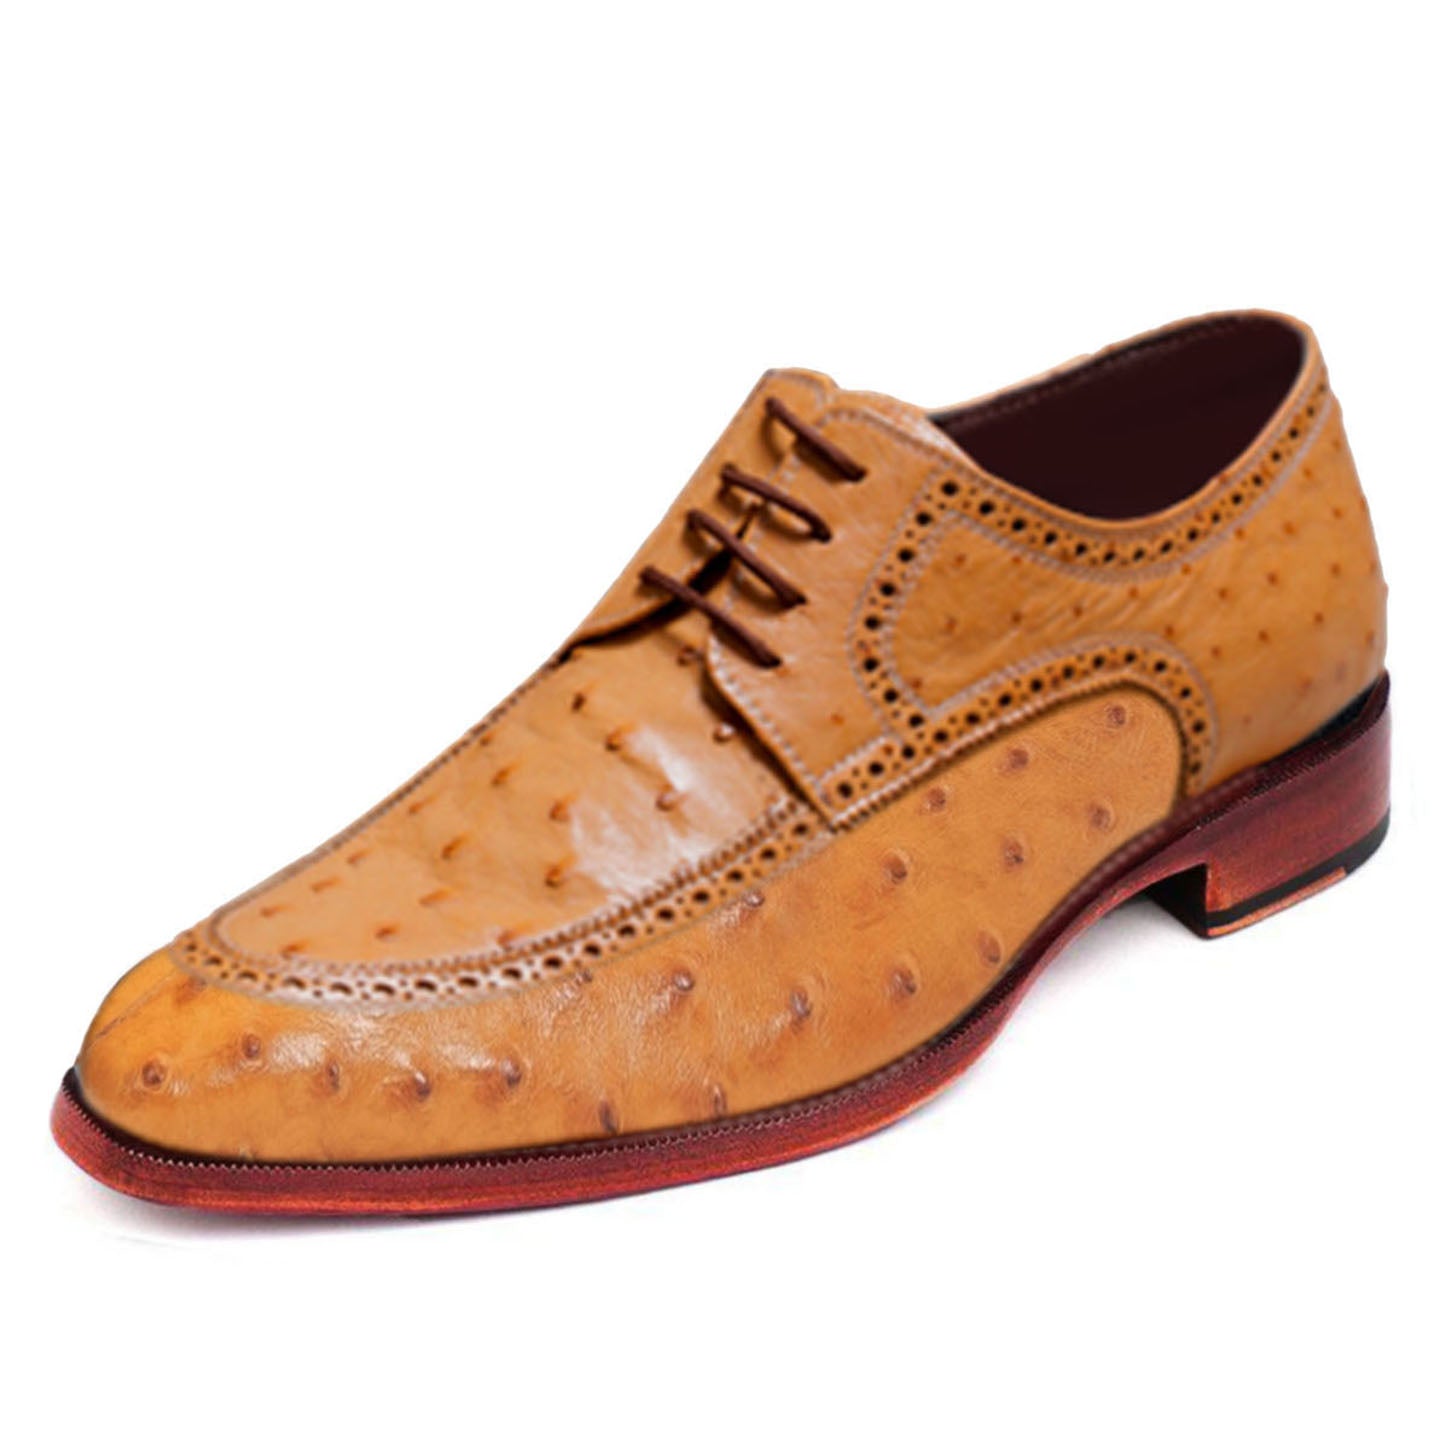 Johny Weber Handmade Tan Ostrich Leather Oxford Shoes